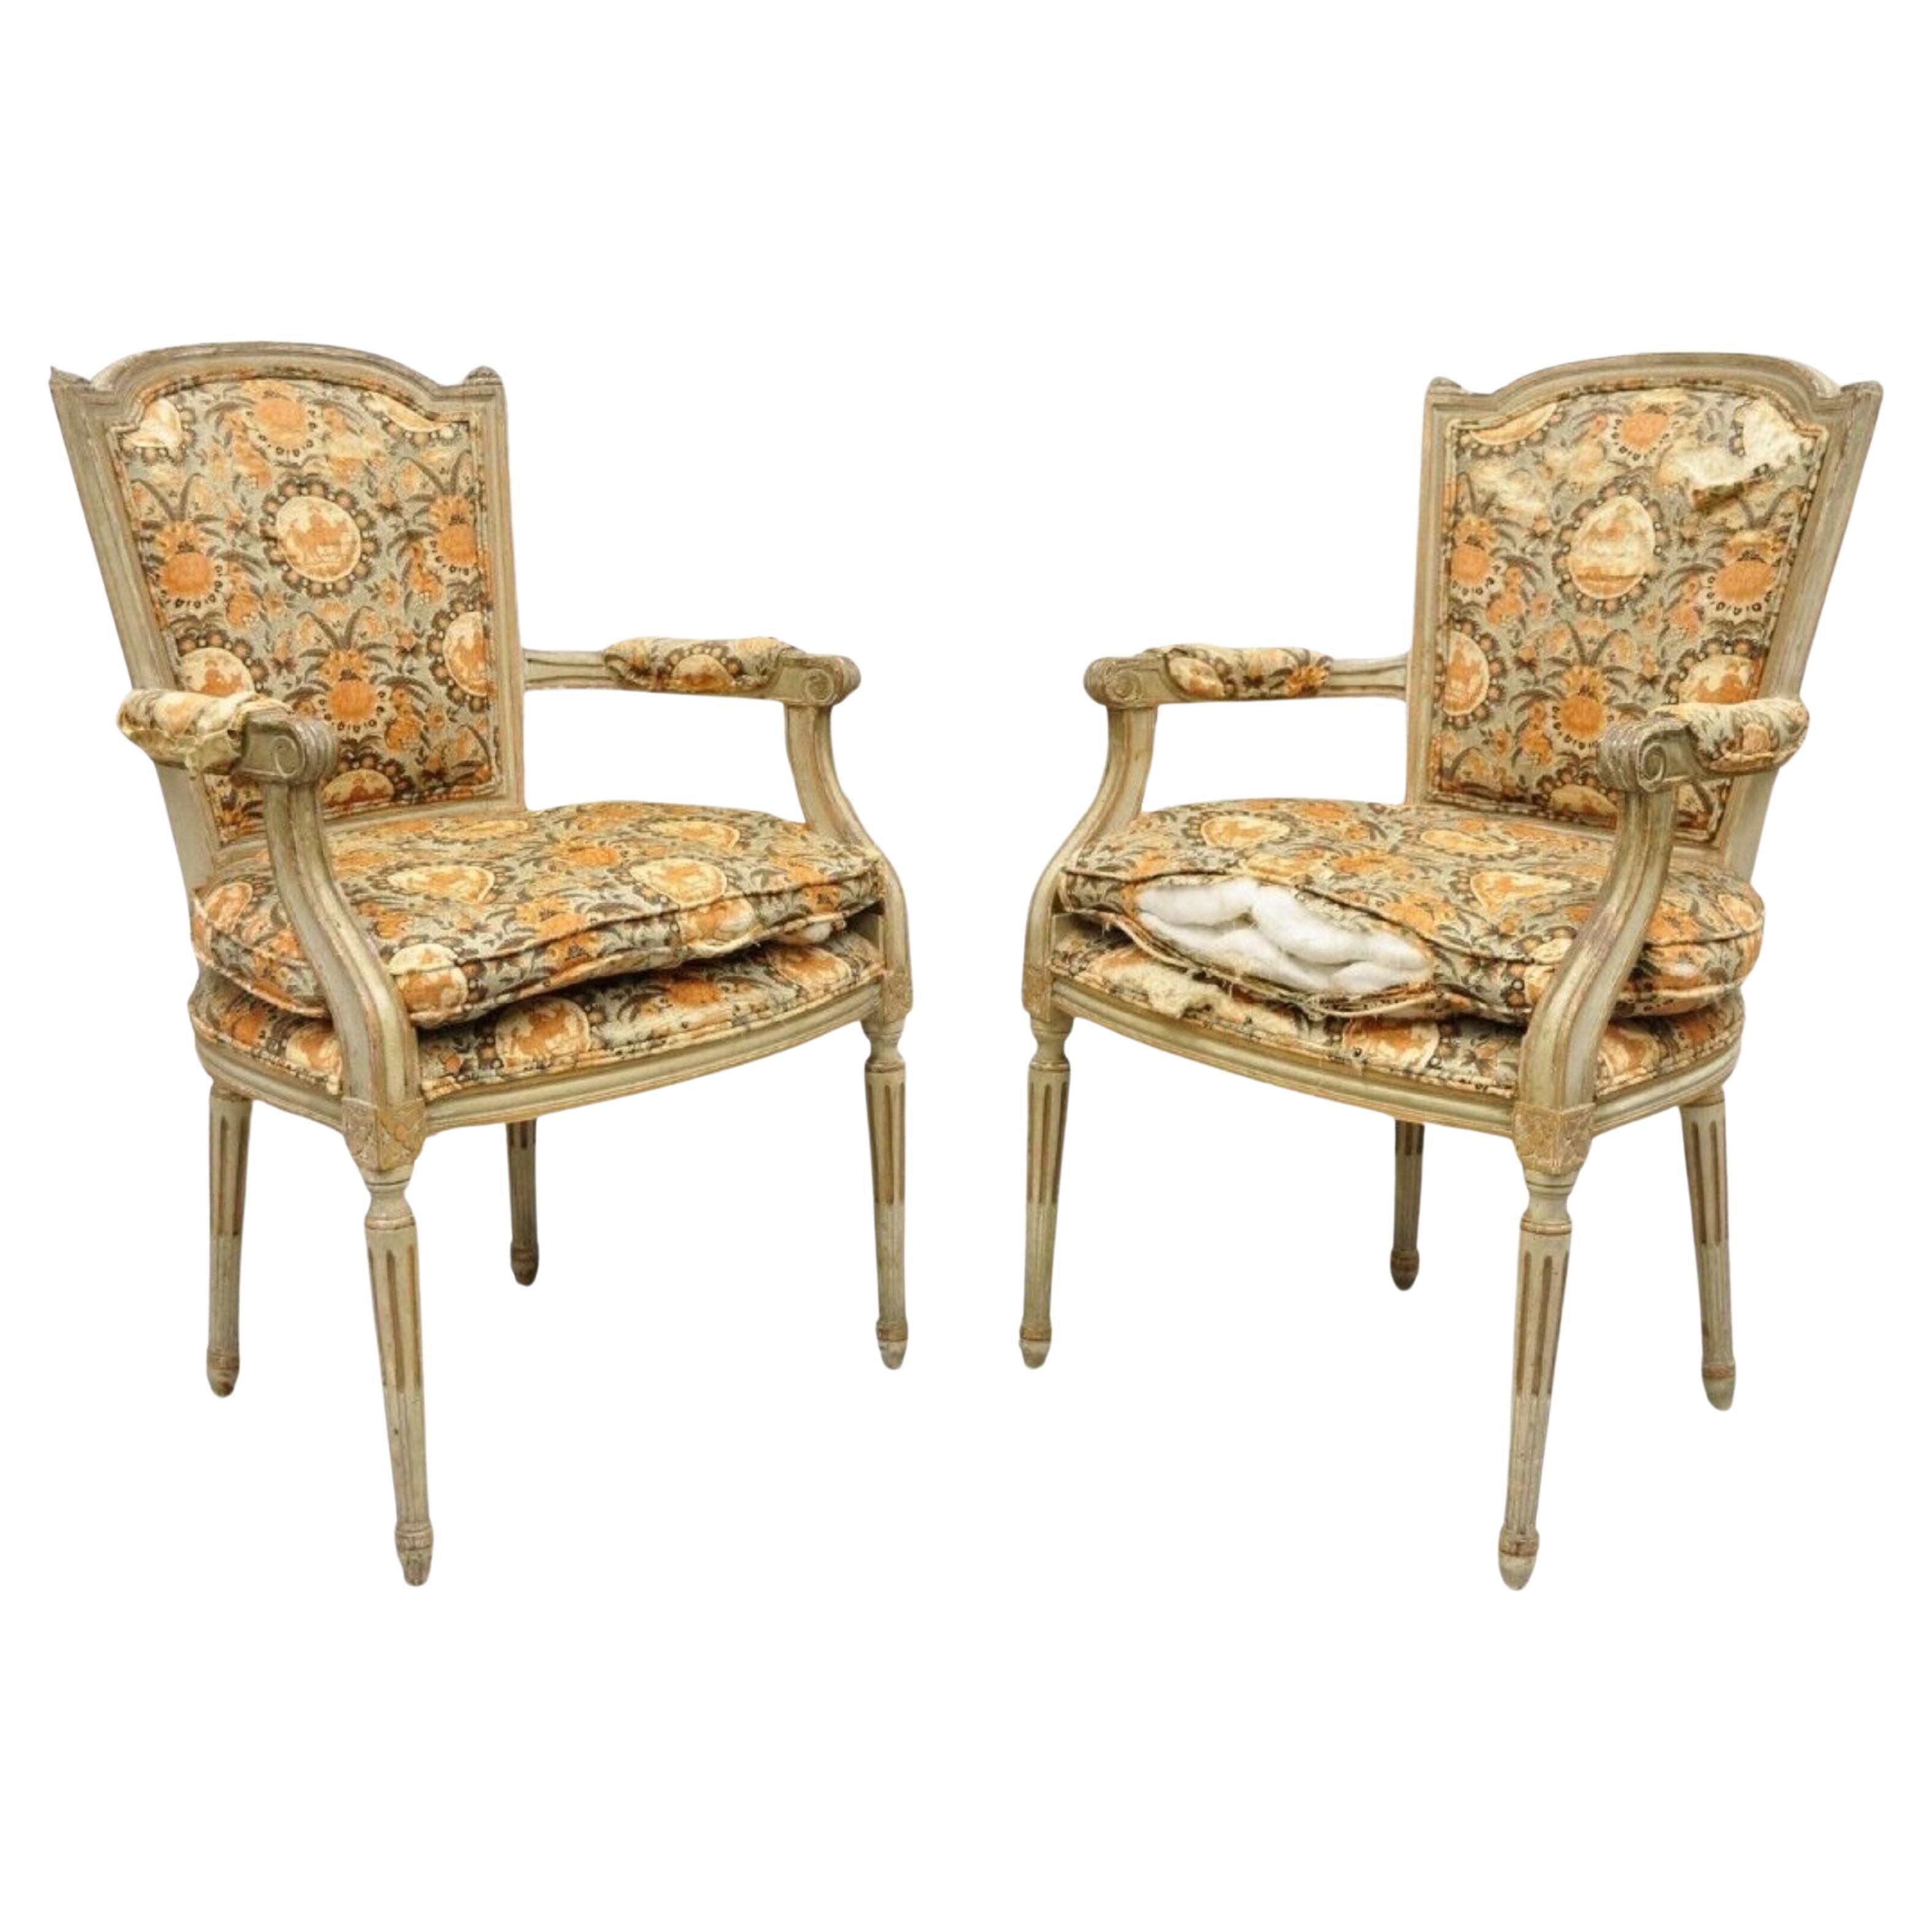 Antique French Louis XVI Style Distressed Cream Painted Fauteuil Arm Chairs Pair For Sale